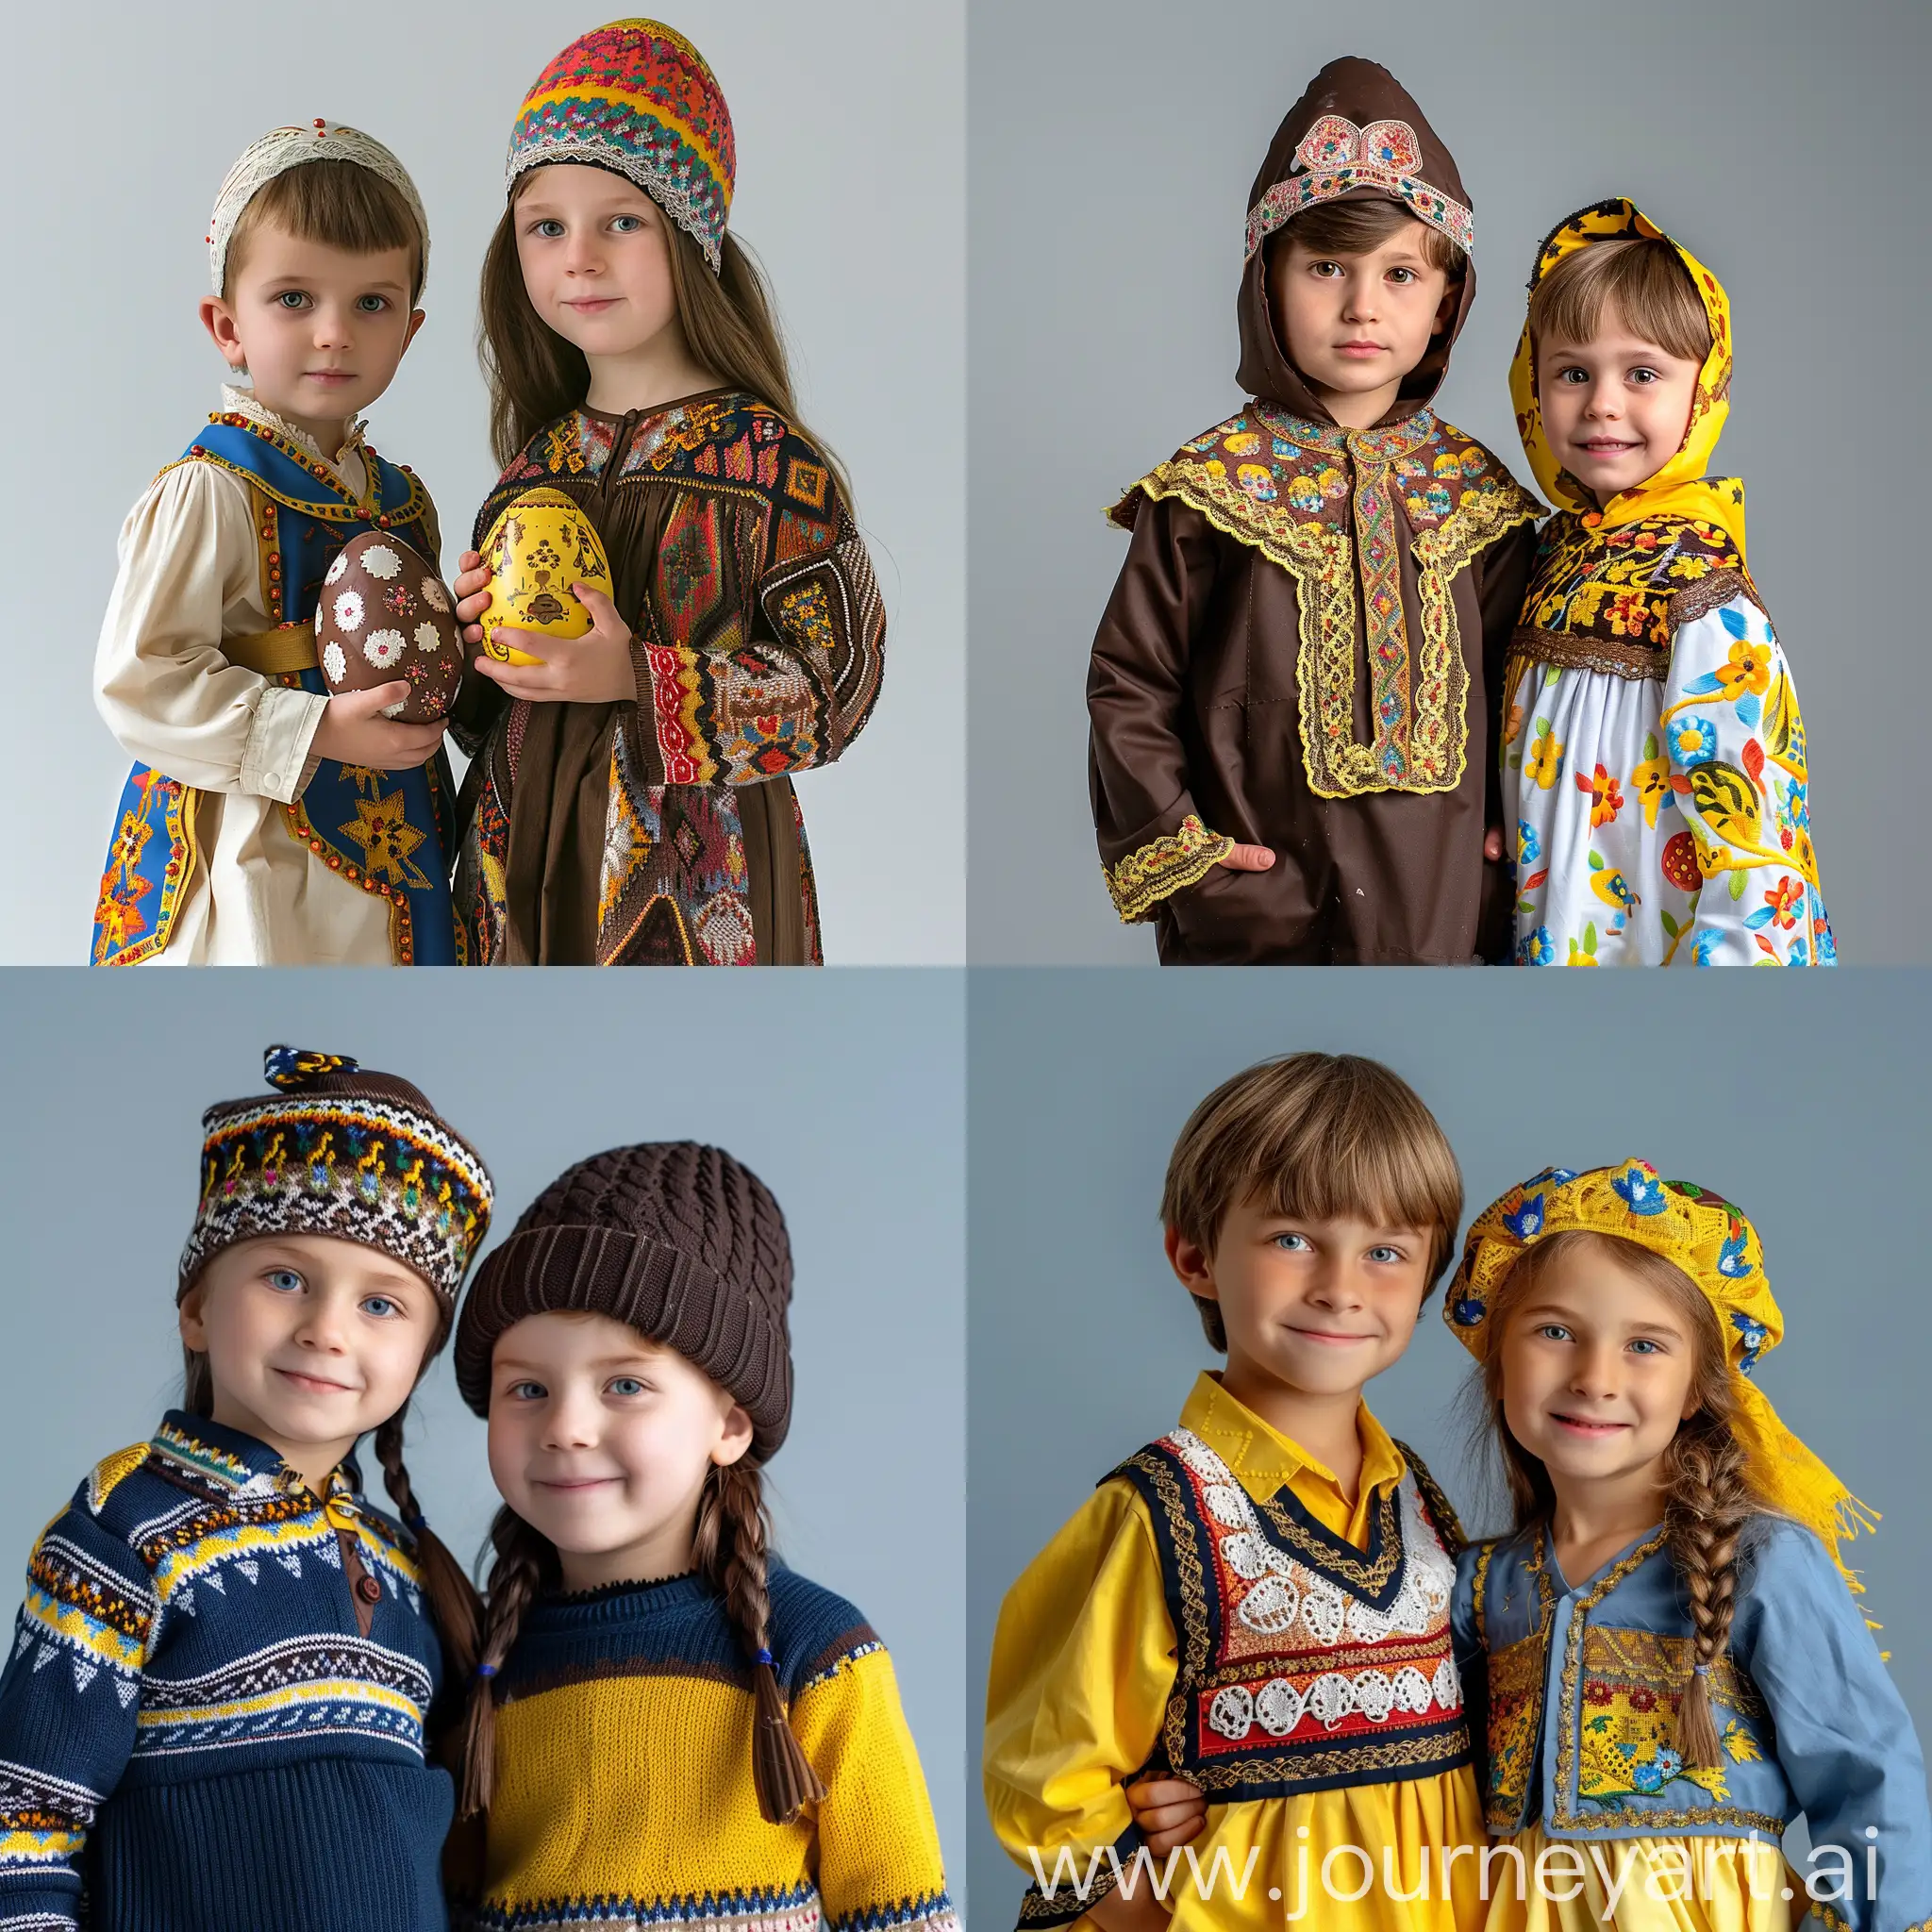 Supporting-Children-in-Ukraine-with-Chocolate-Easter-Eggs